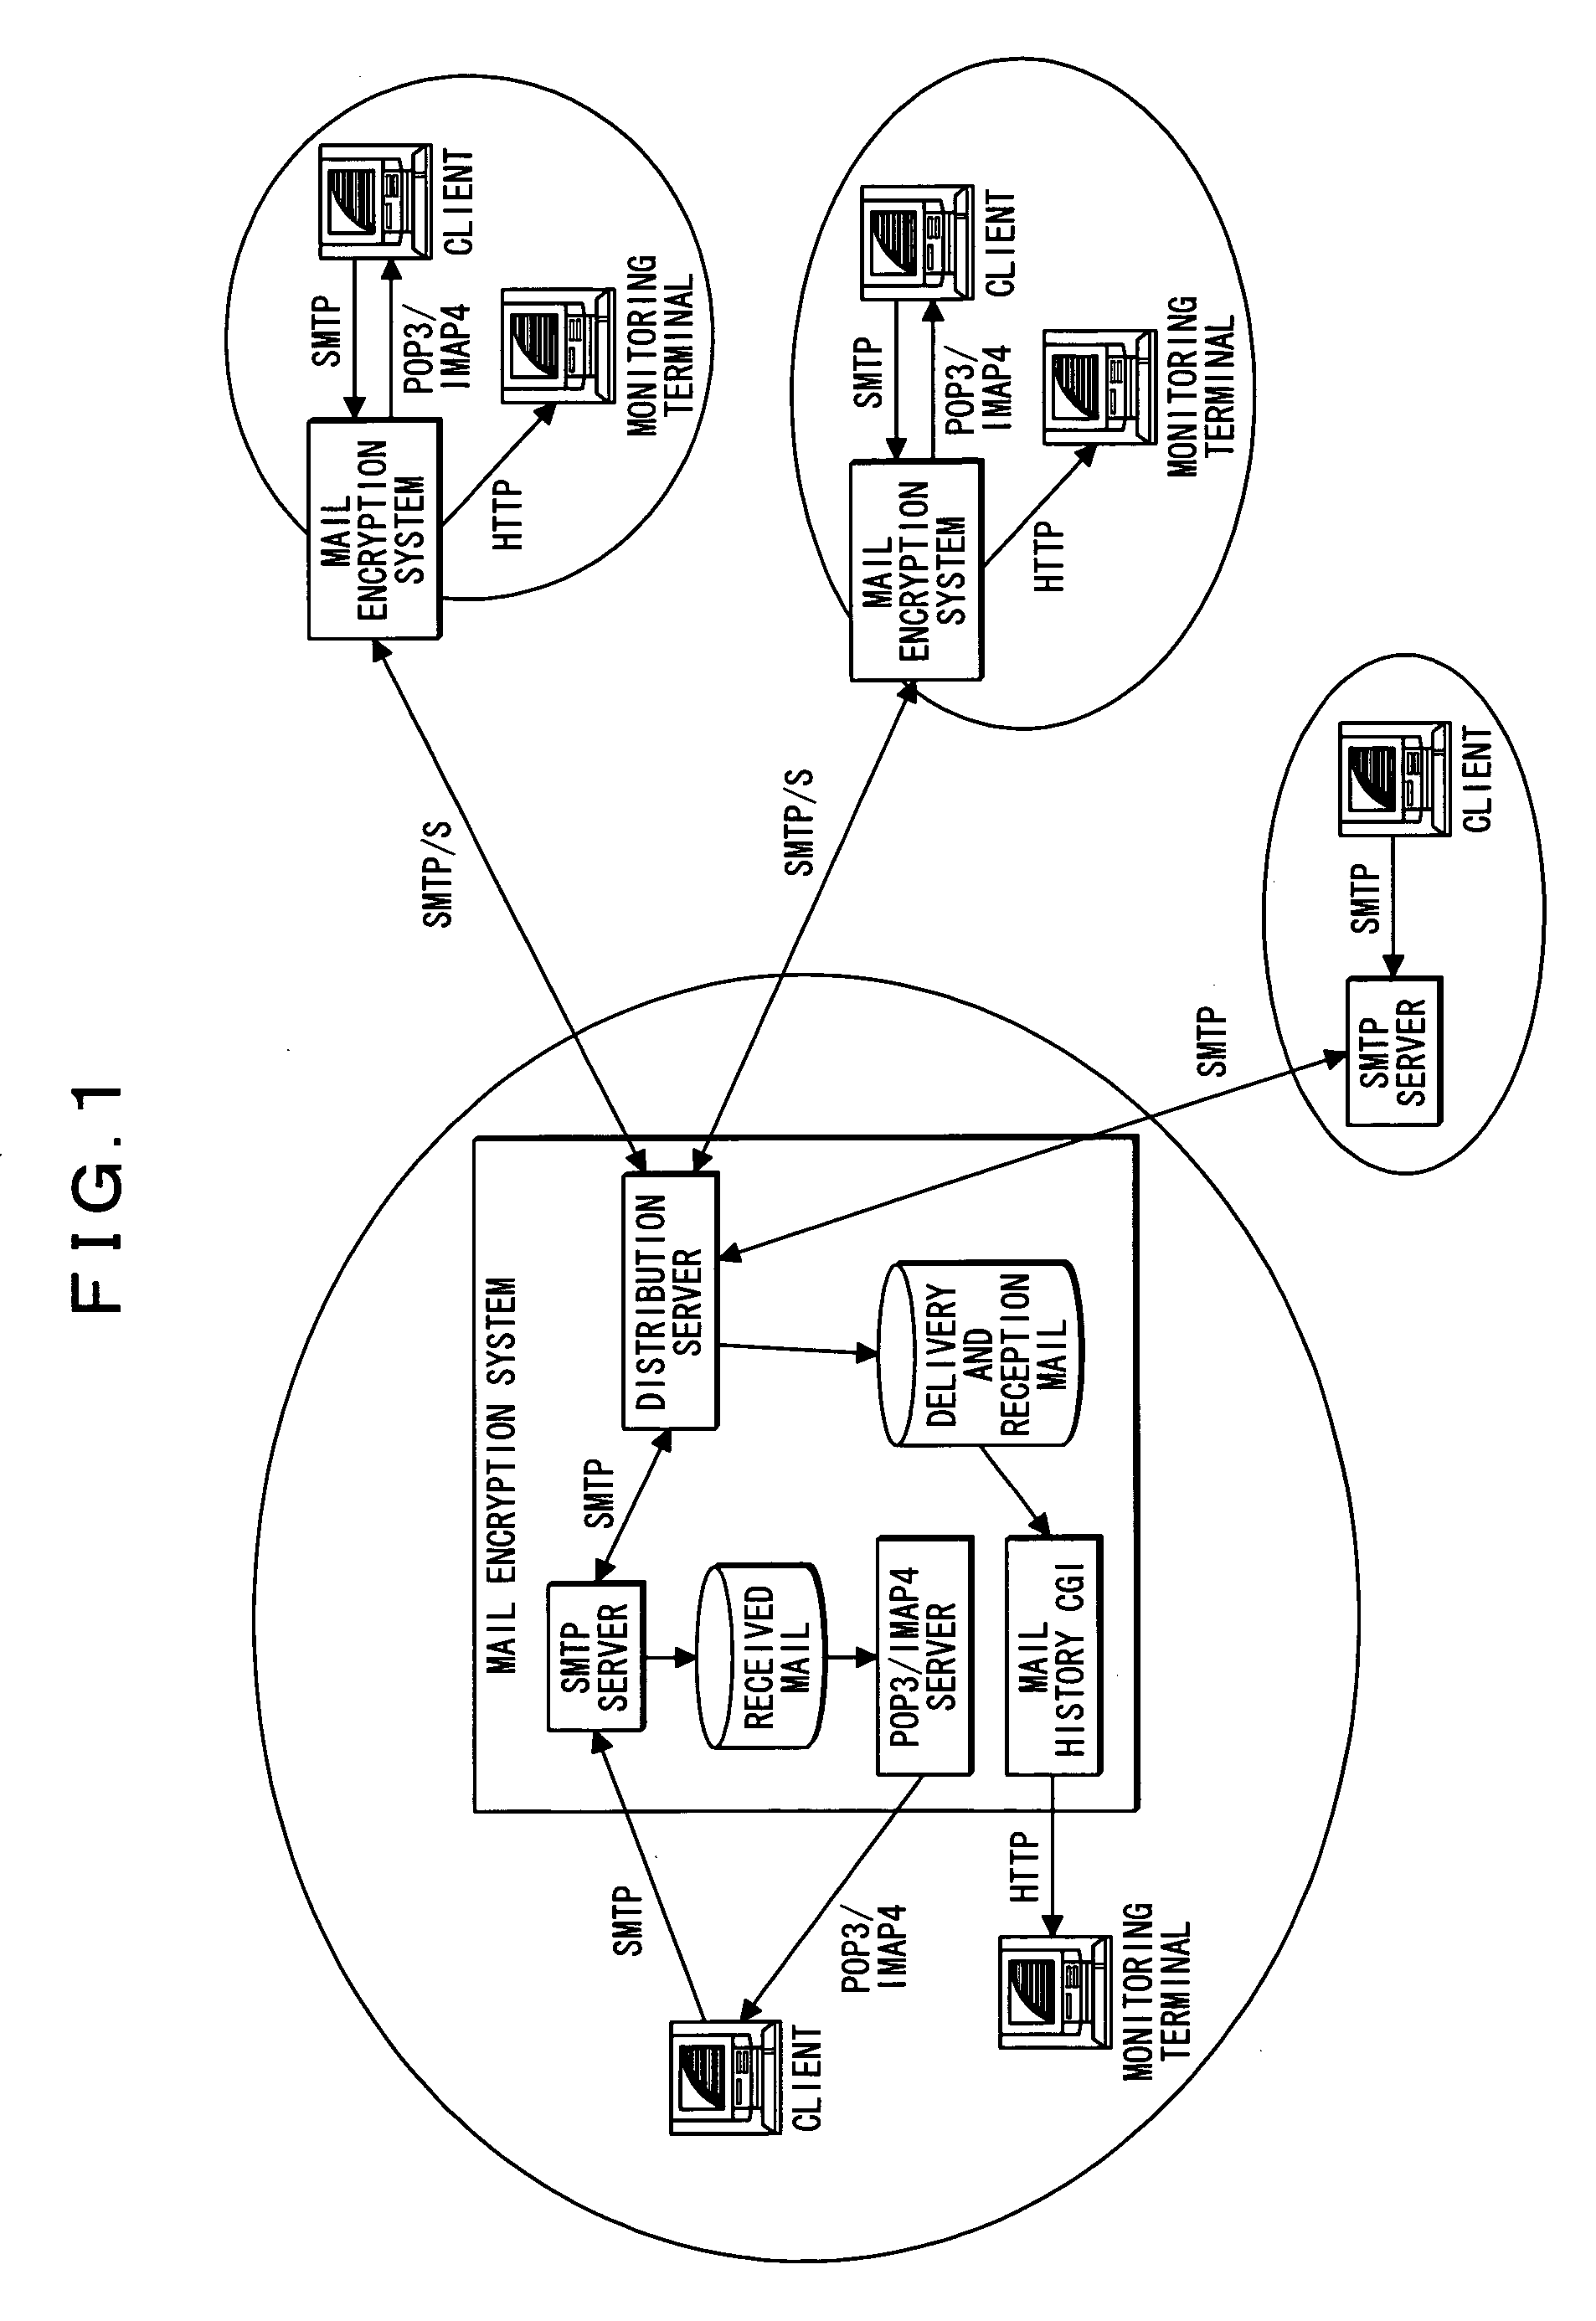 Electronic mail sending and receiving system